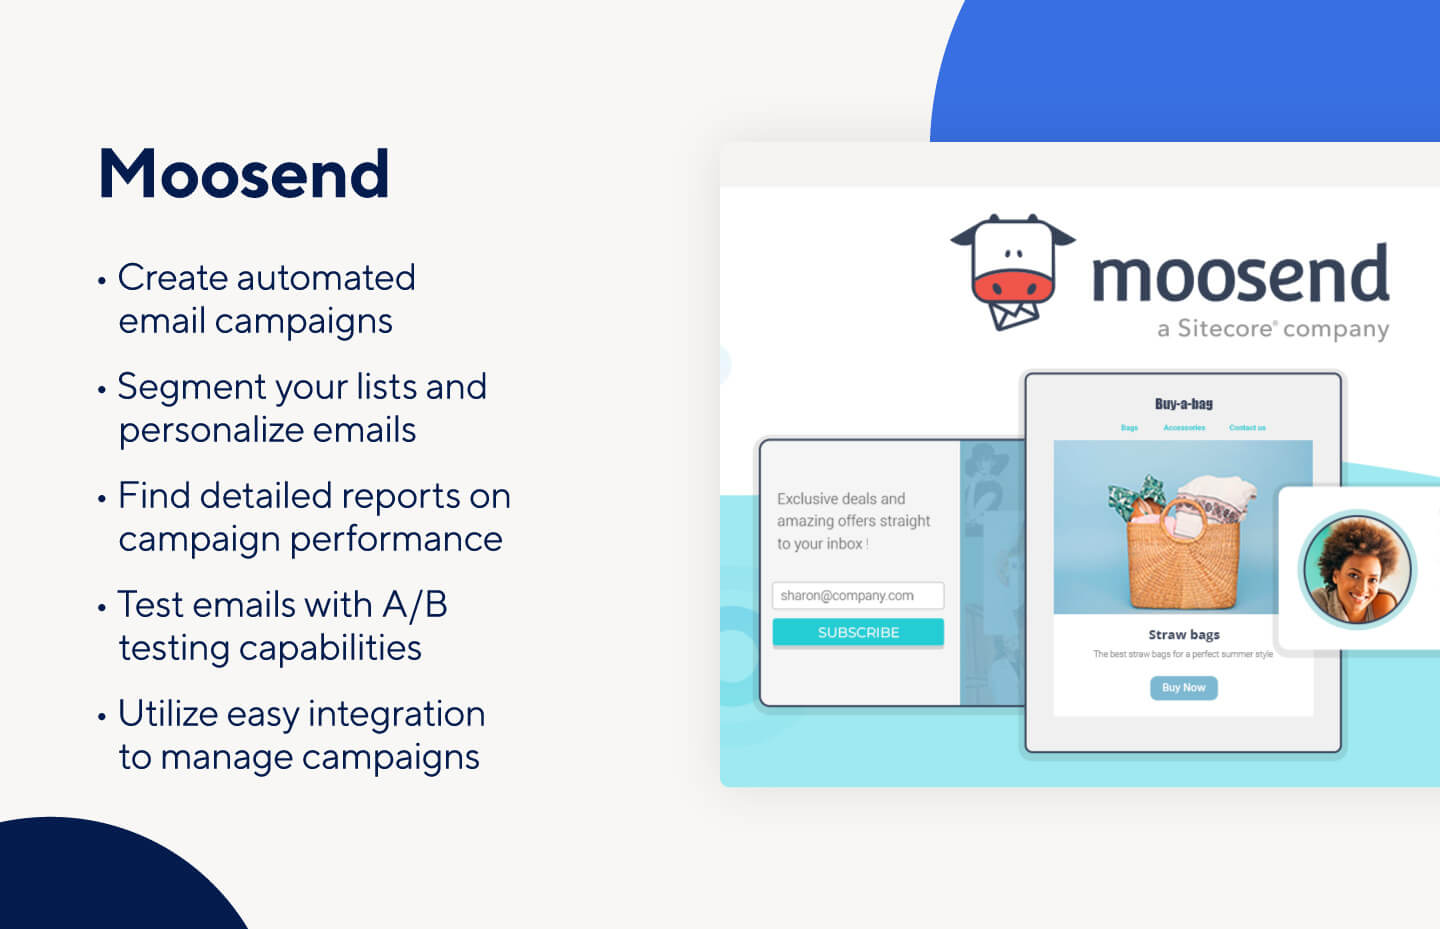 Moosend is a digital marketing tool that can help create, send, and track email campaigns.